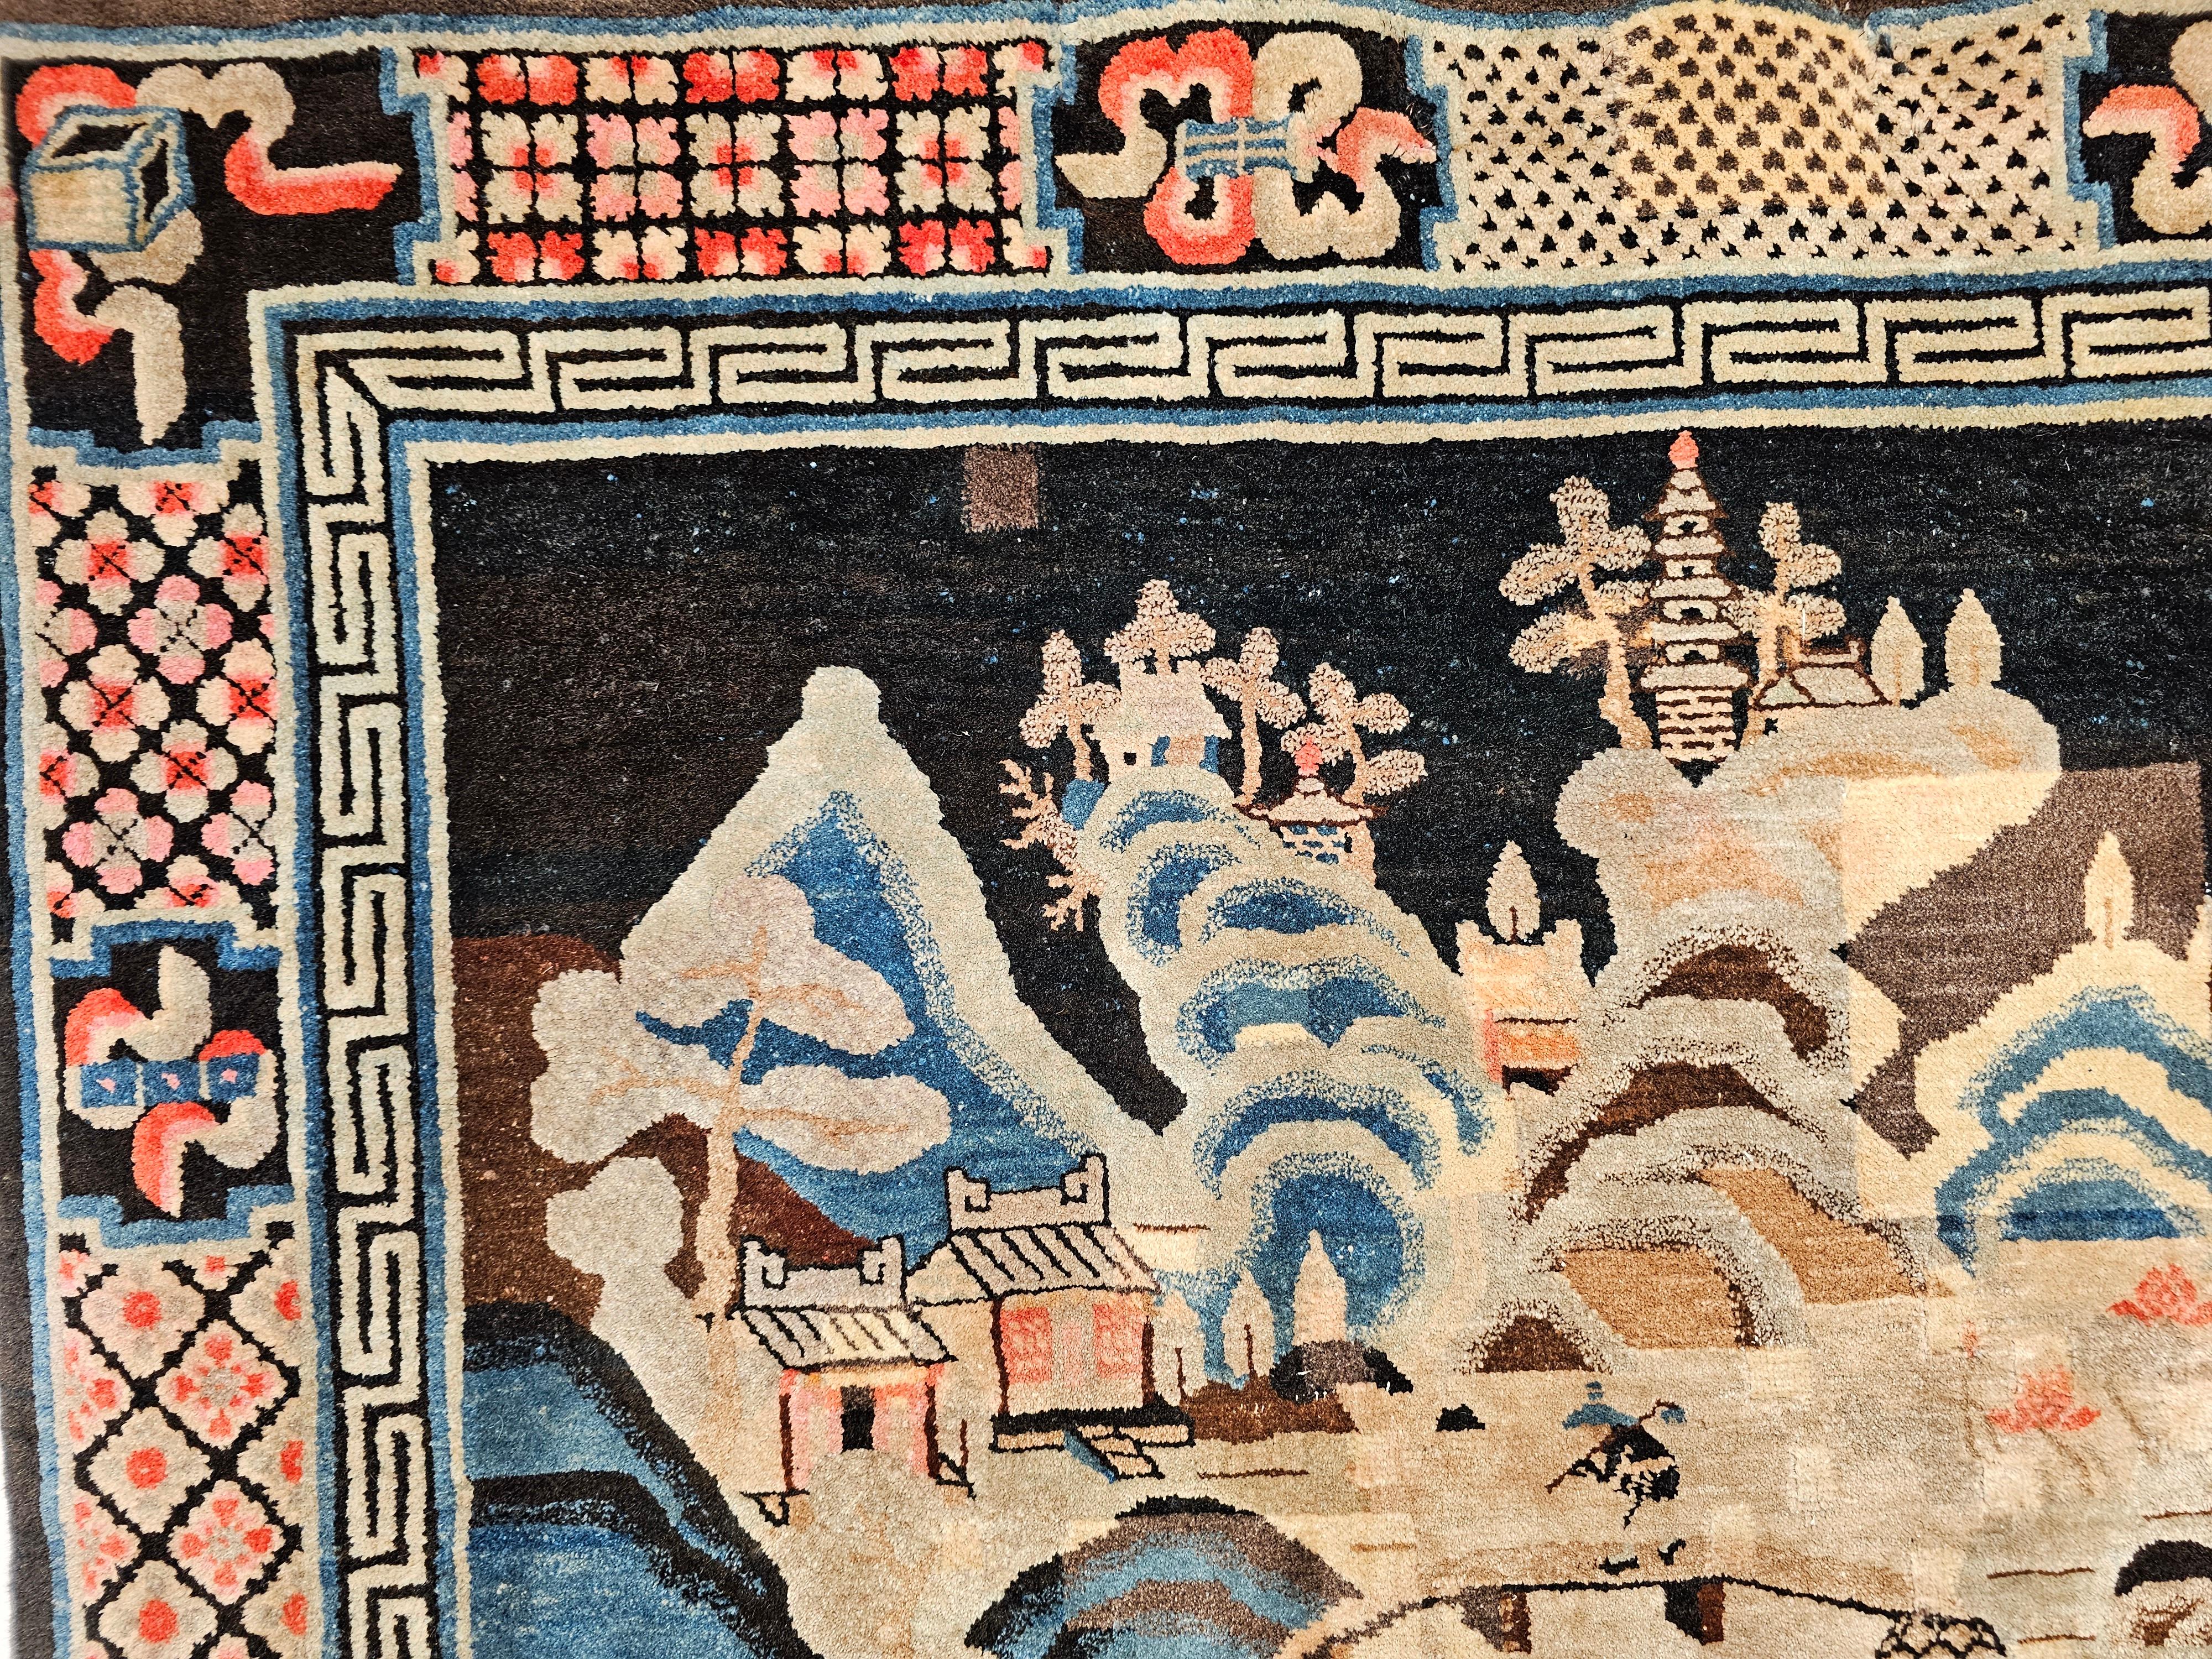 Hand-Woven Late 1800s Ningxia Chinese Rug with A Pictorial Design of Forest, Mountains For Sale